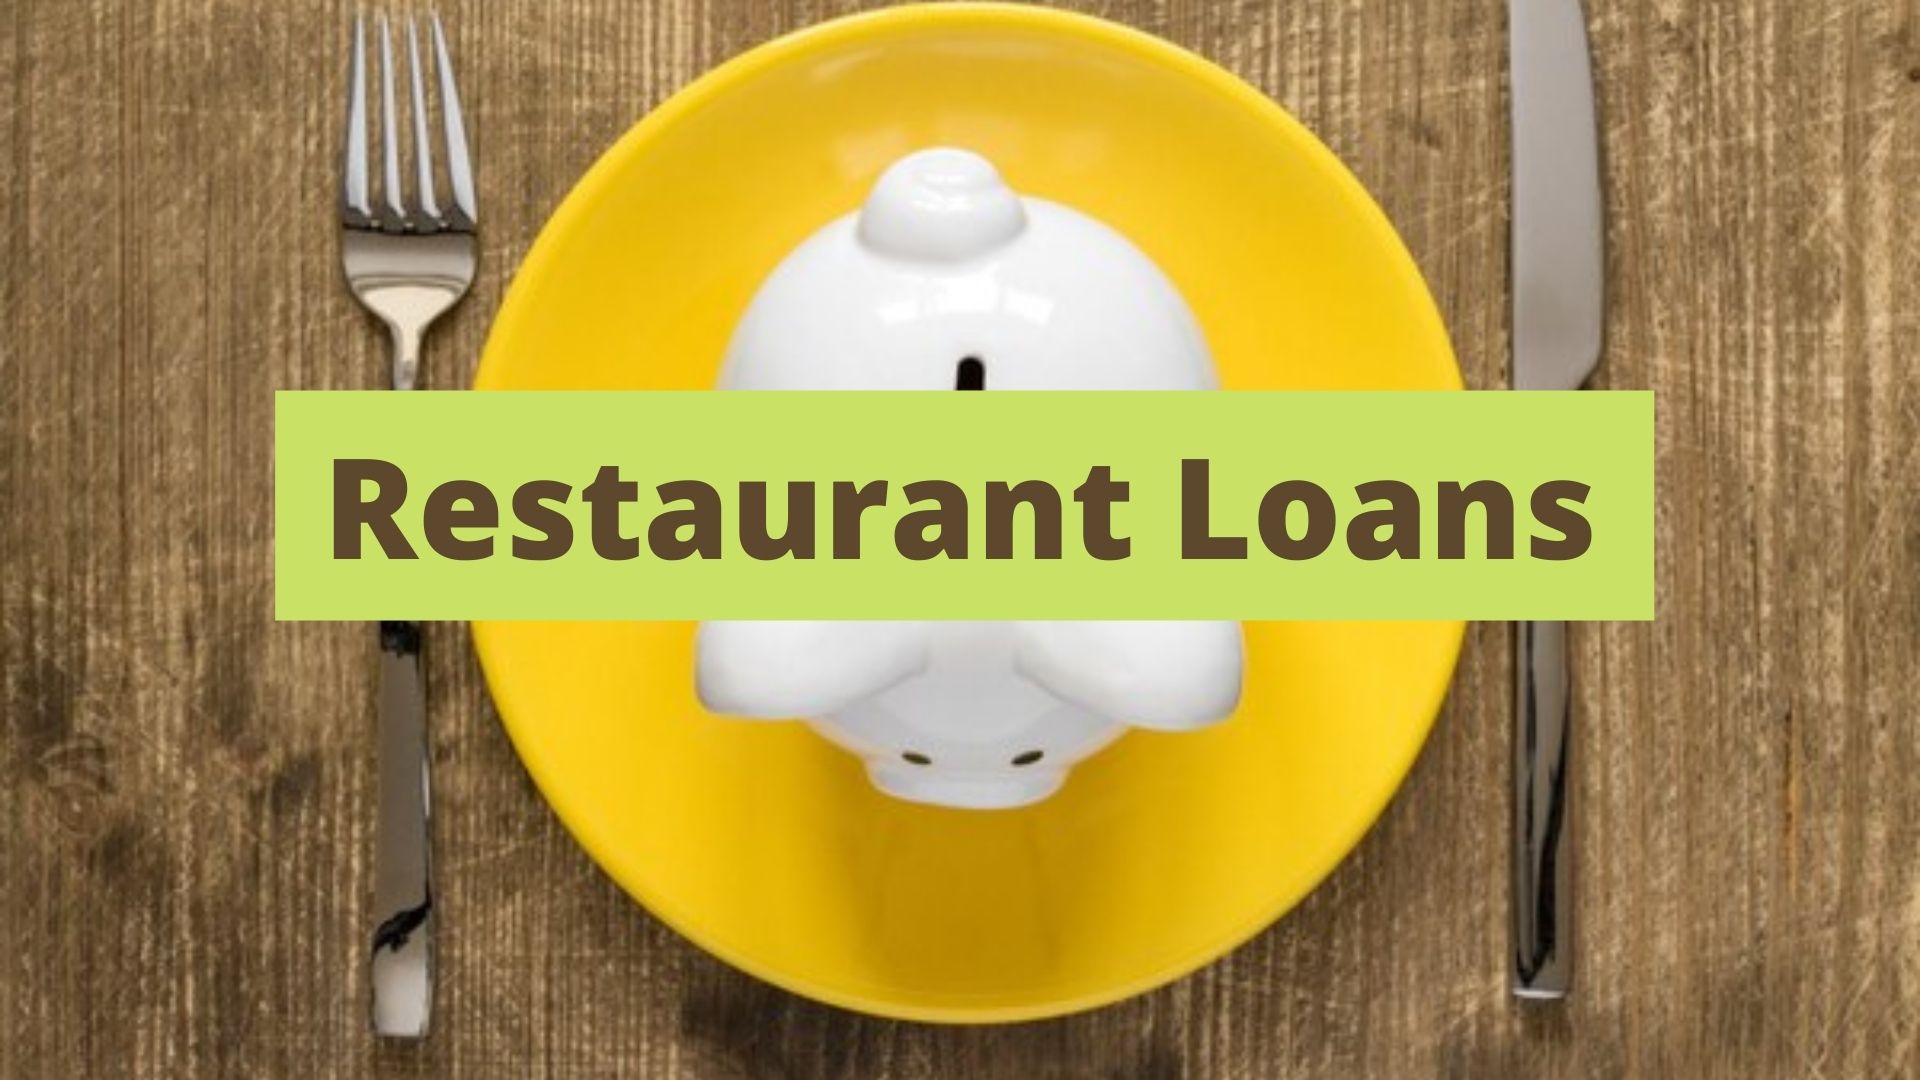 Small Business Loans and Other Ways to Start Up or Grow Your Restaurant Business